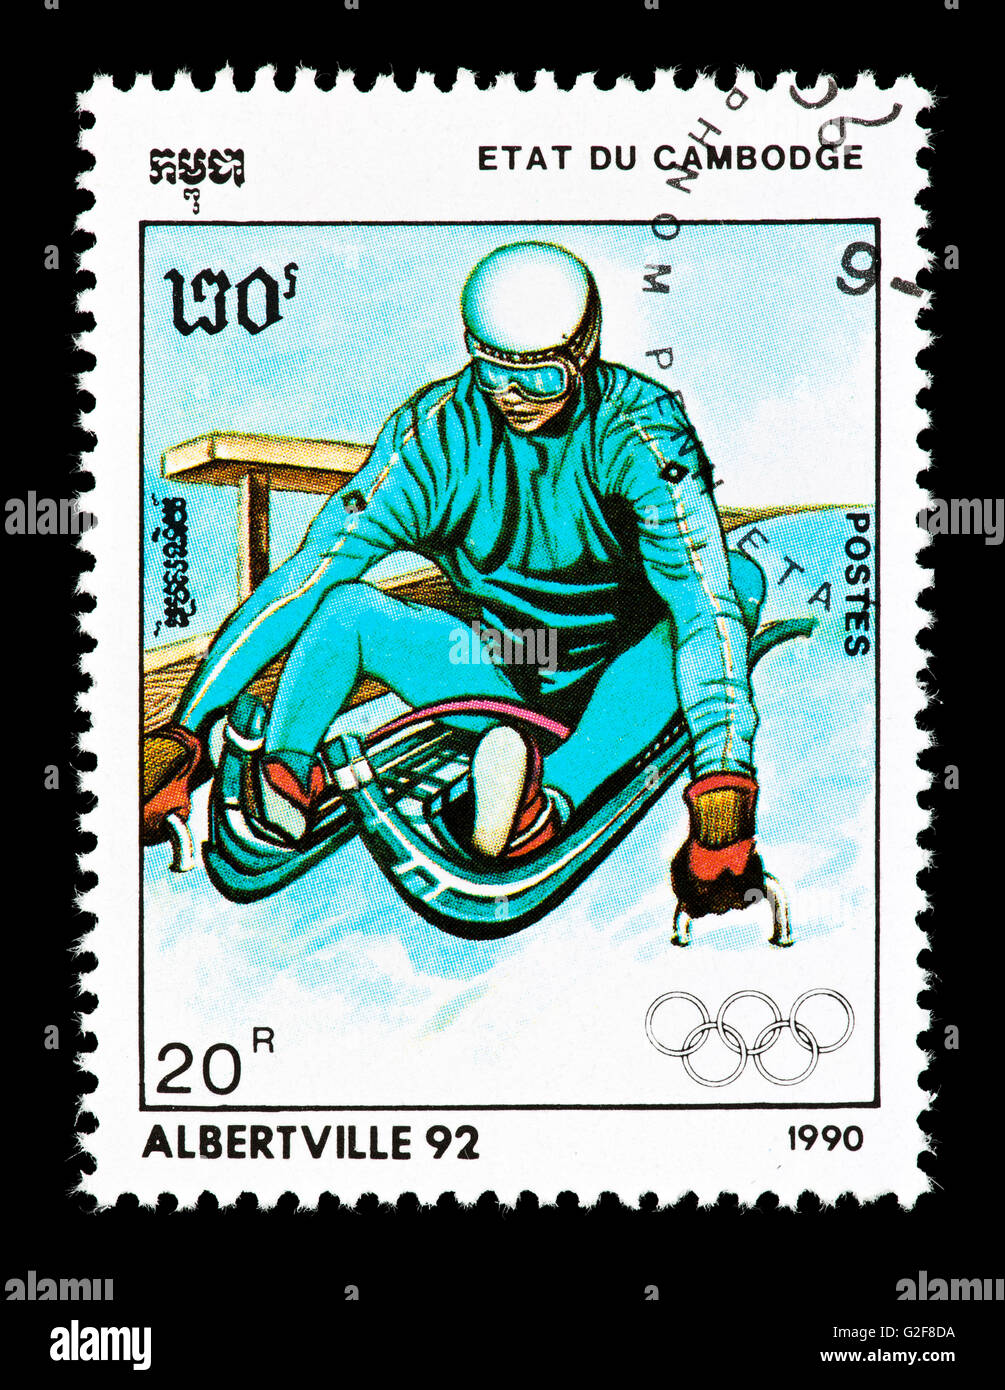 Postage stamp from Cambodia depicting a luger at the start, issued for the 1992 Olympic Games in Albertville, France. Stock Photo